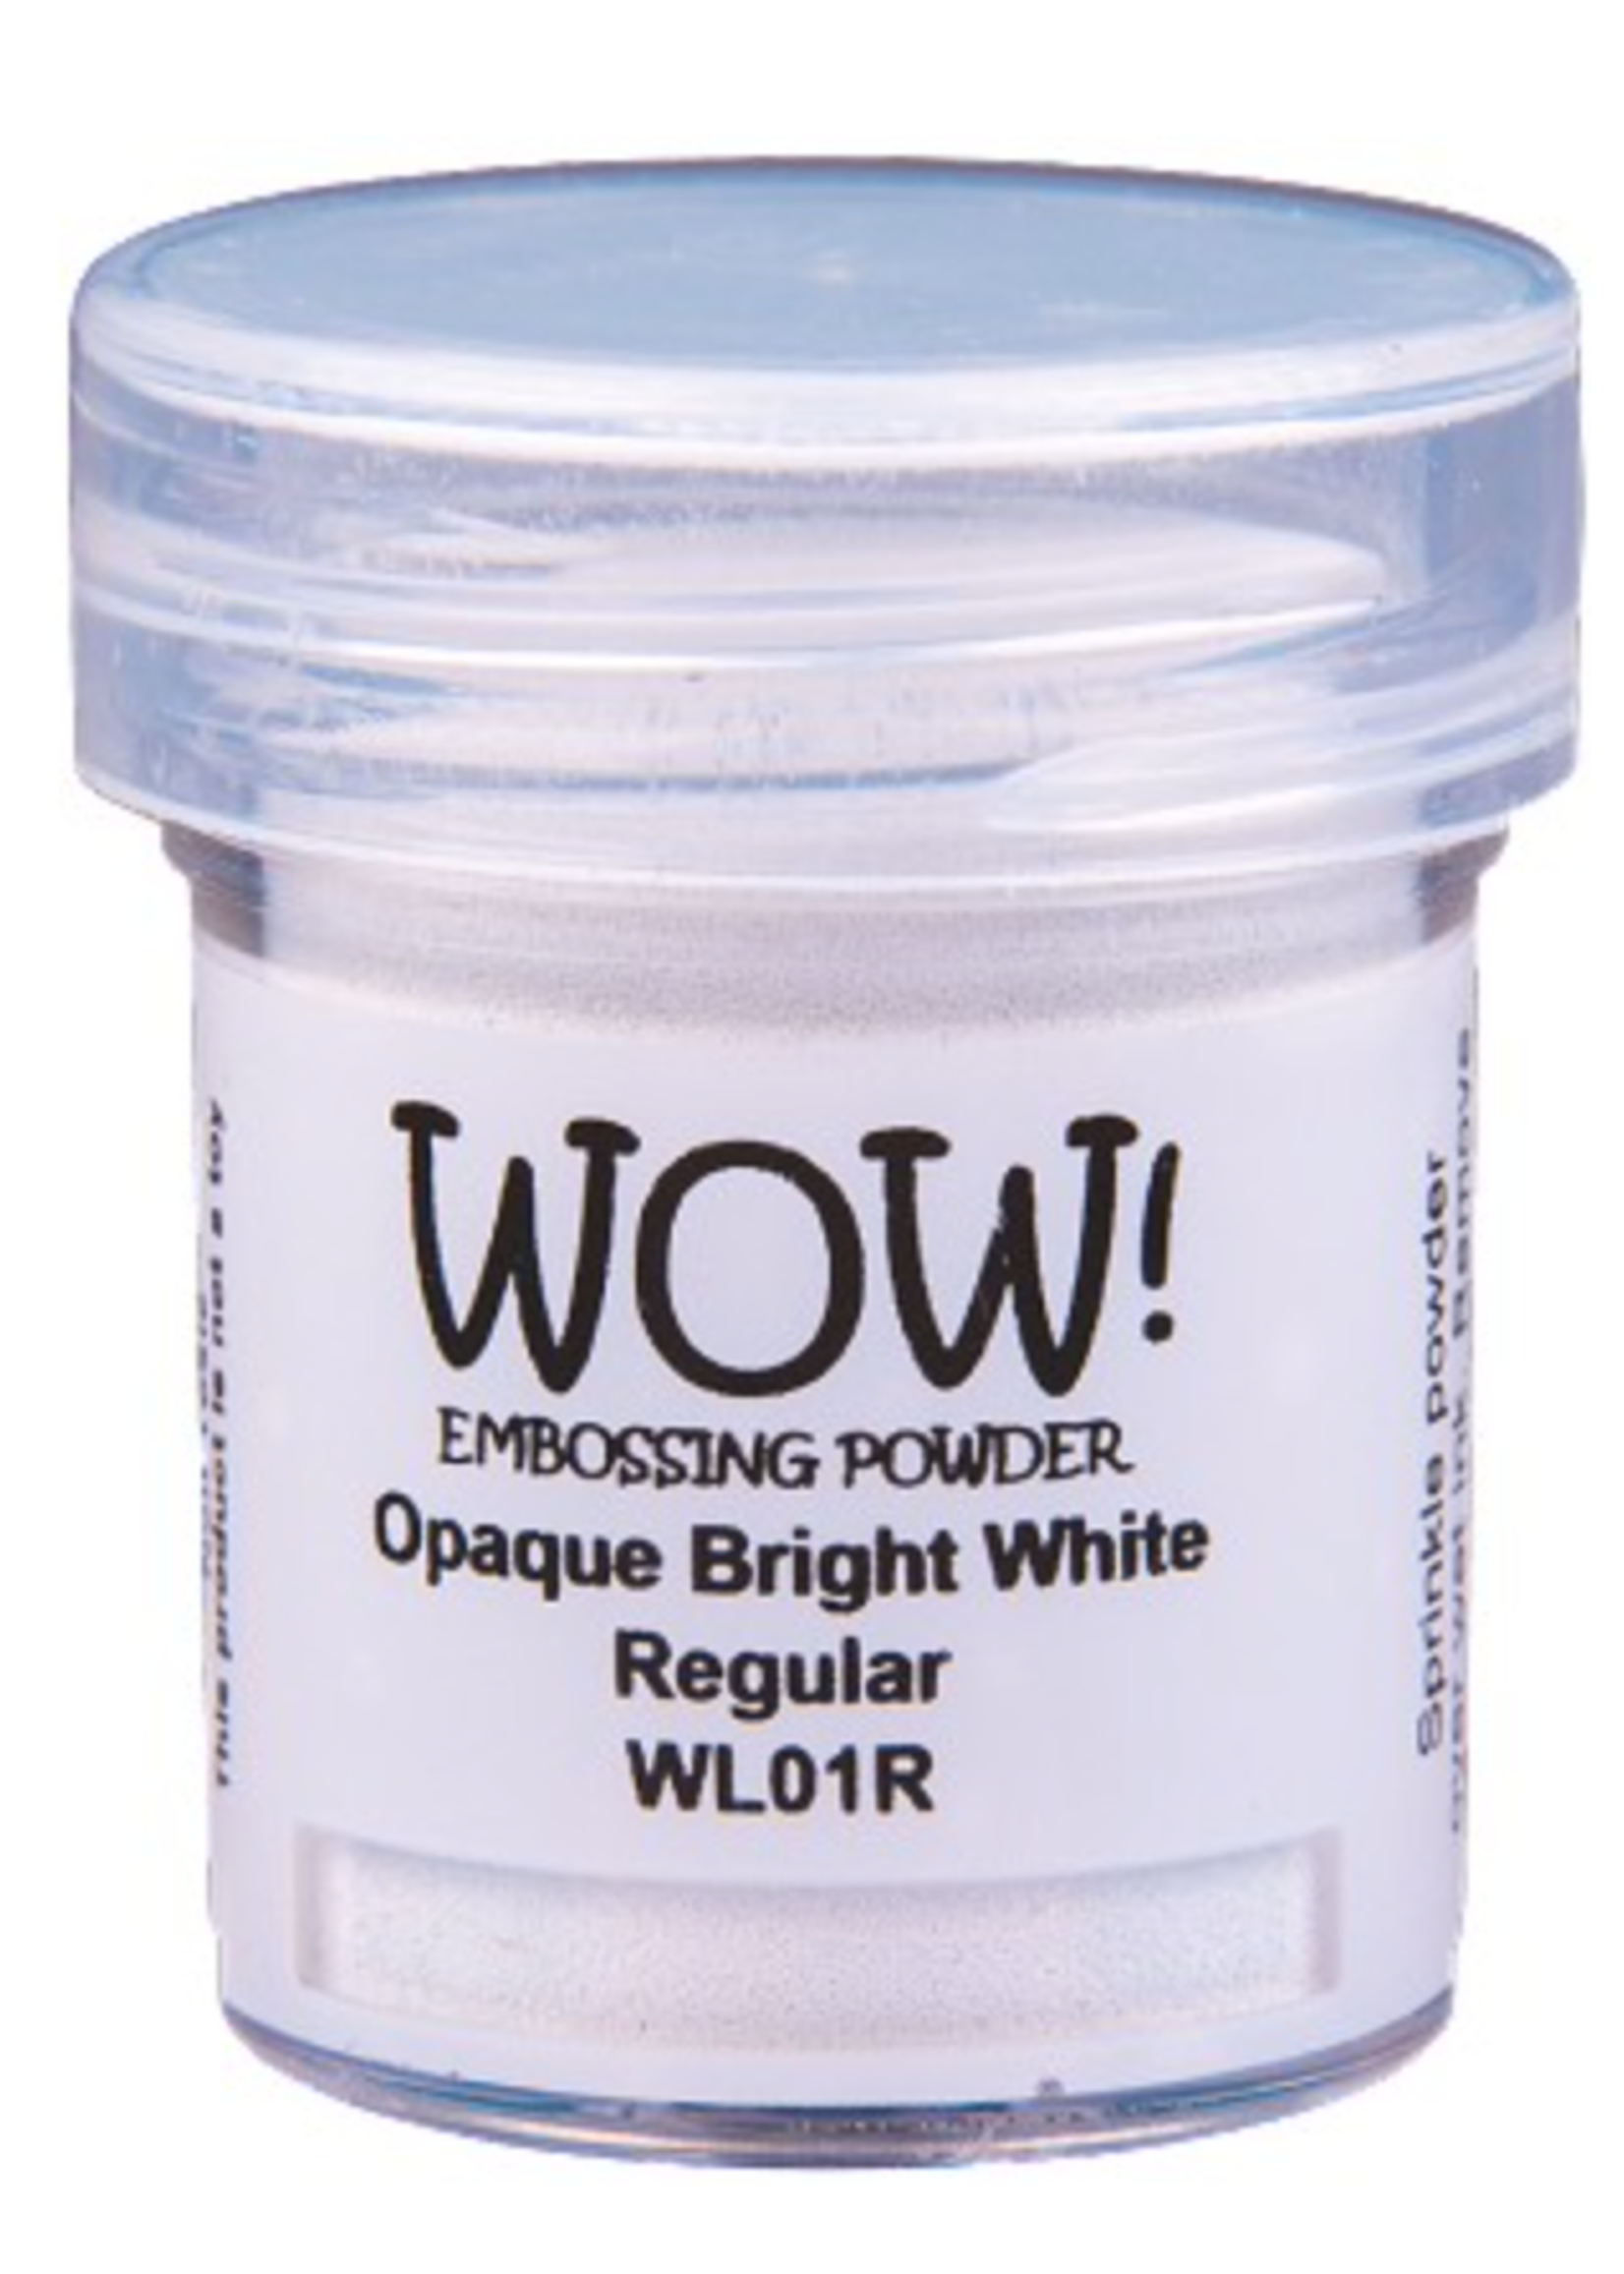 wow! Wow! Opaque  Bright White